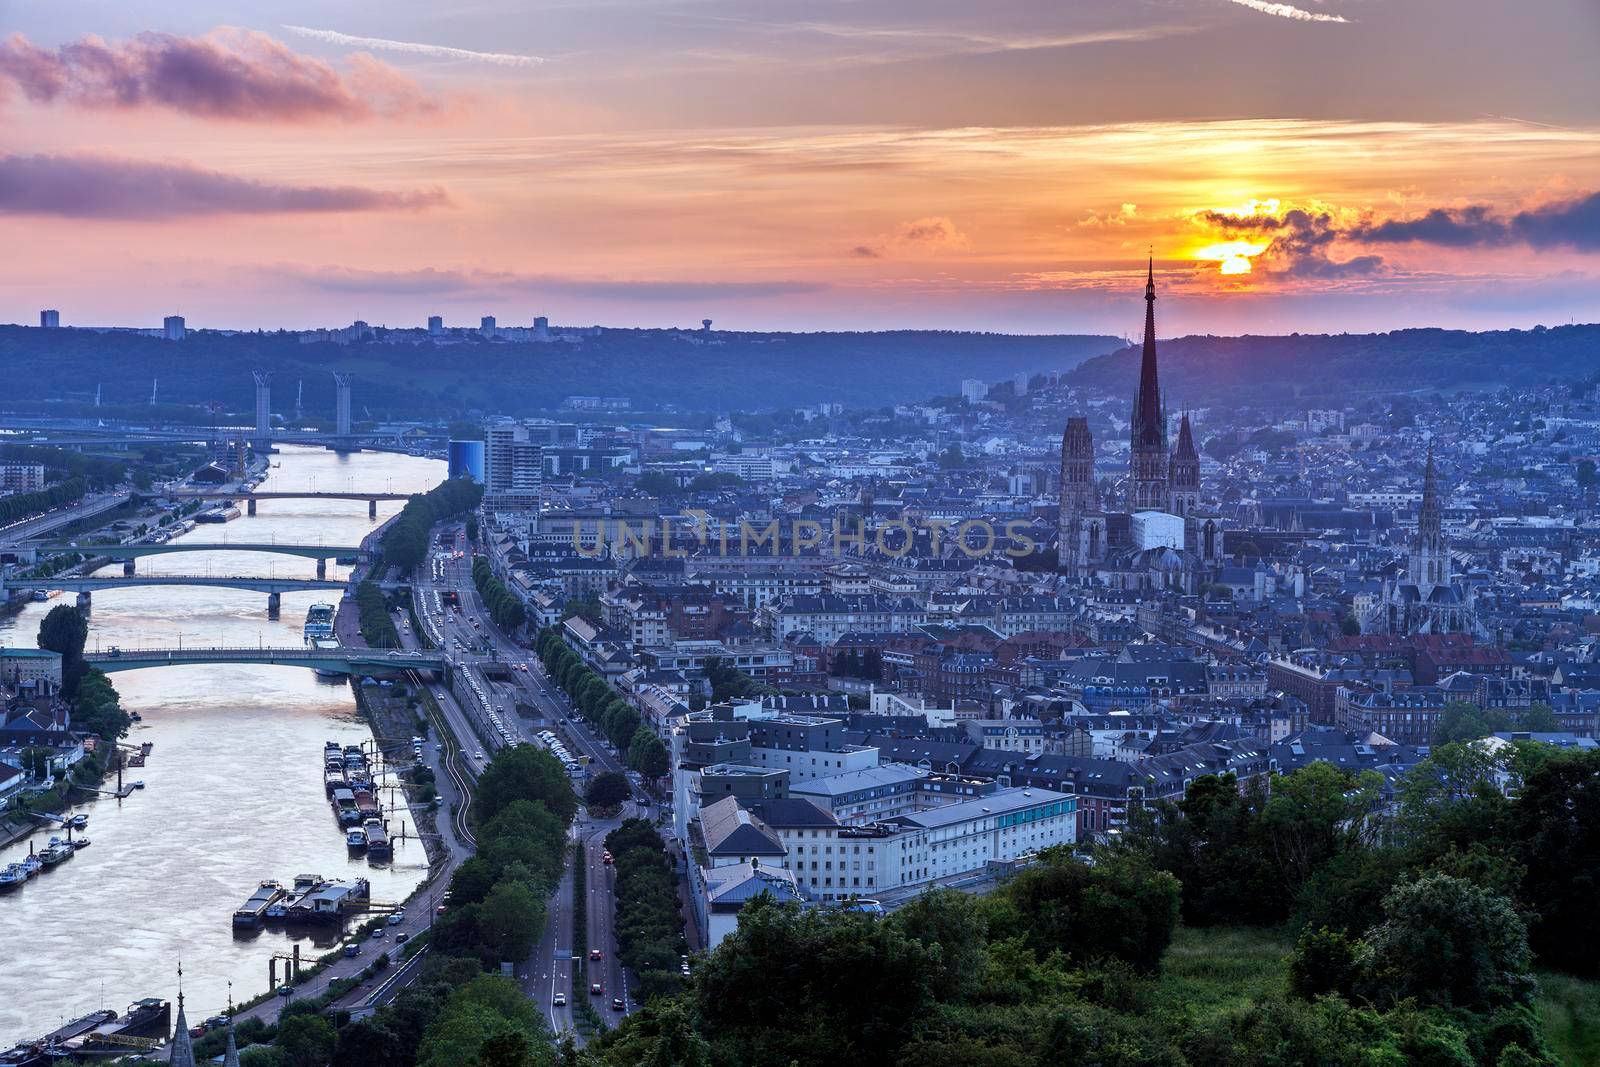 Sunset in Rouen - aerial view. Rouen, Normandy, France